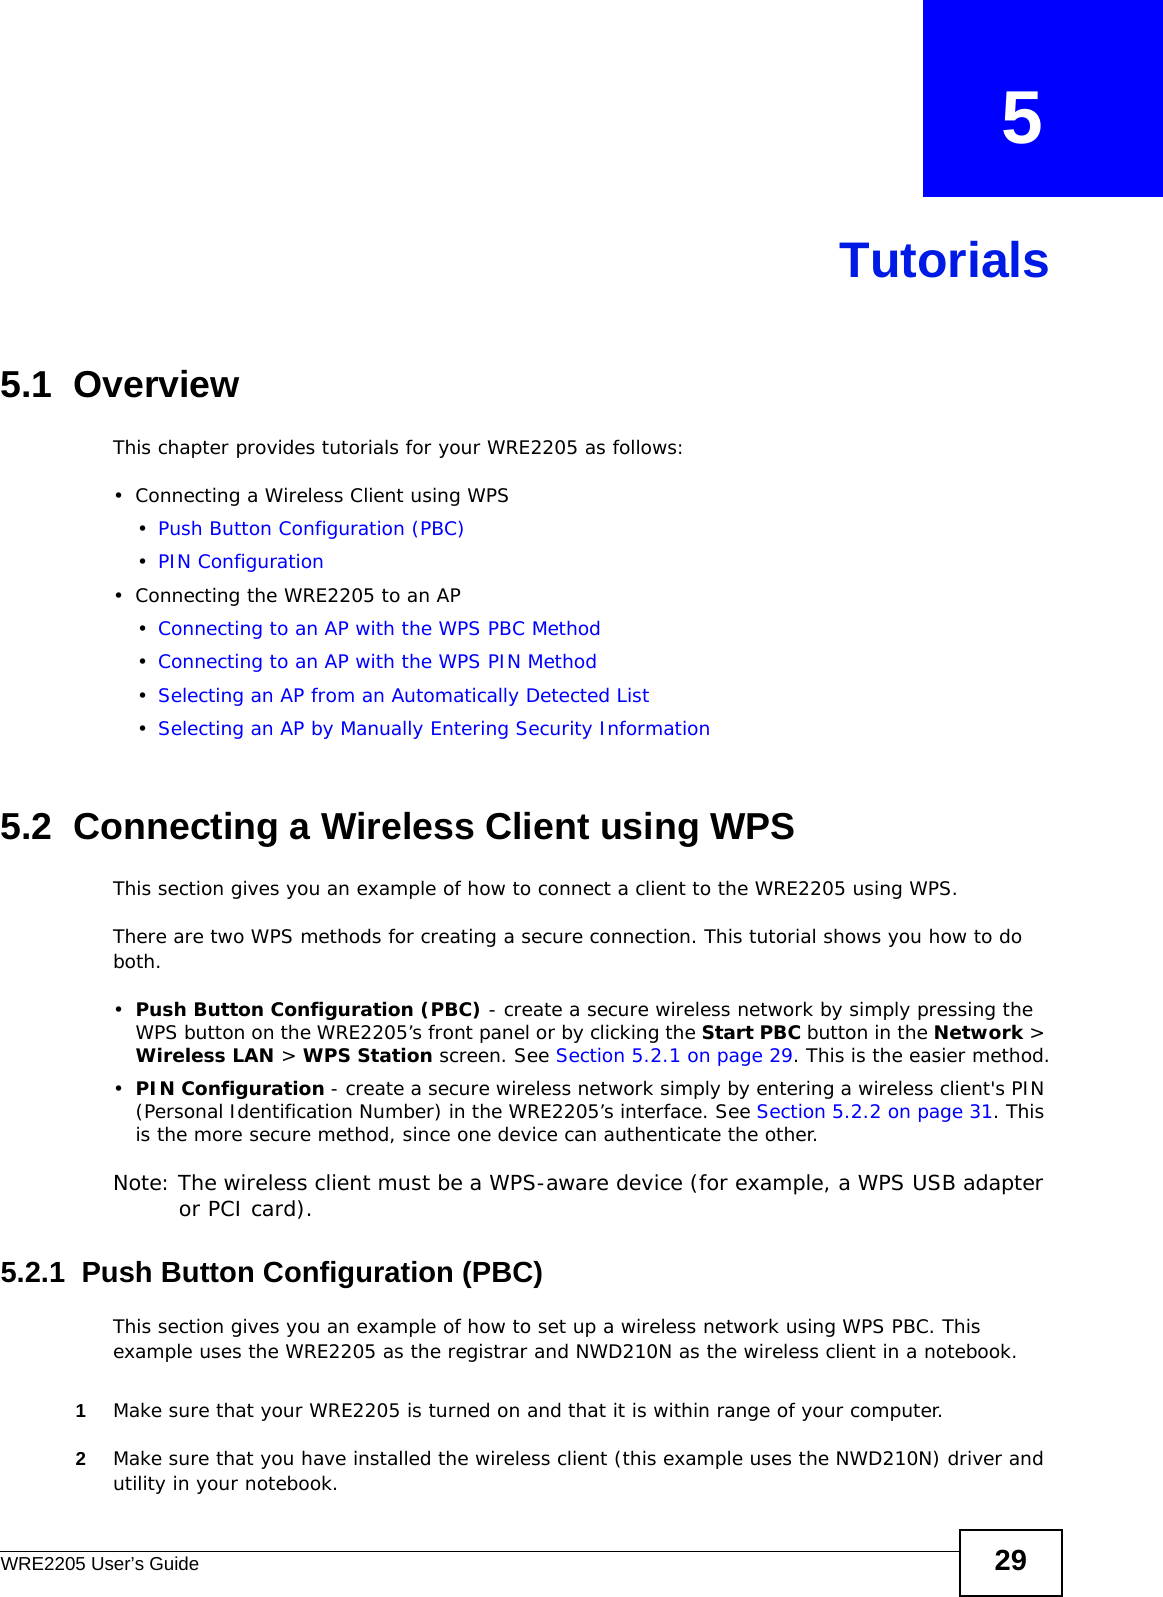 WRE2205 User’s Guide 29CHAPTER   5Tutorials5.1  OverviewThis chapter provides tutorials for your WRE2205 as follows:• Connecting a Wireless Client using WPS•Push Button Configuration (PBC)•PIN Configuration• Connecting the WRE2205 to an AP•Connecting to an AP with the WPS PBC Method•Connecting to an AP with the WPS PIN Method•Selecting an AP from an Automatically Detected List•Selecting an AP by Manually Entering Security Information5.2  Connecting a Wireless Client using WPSThis section gives you an example of how to connect a client to the WRE2205 using WPS.There are two WPS methods for creating a secure connection. This tutorial shows you how to do both.•Push Button Configuration (PBC) - create a secure wireless network by simply pressing the WPS button on the WRE2205’s front panel or by clicking the Start PBC button in the Network &gt; Wireless LAN &gt; WPS Station screen. See Section 5.2.1 on page 29. This is the easier method.•PIN Configuration - create a secure wireless network simply by entering a wireless client&apos;s PIN (Personal Identification Number) in the WRE2205’s interface. See Section 5.2.2 on page 31. This is the more secure method, since one device can authenticate the other.Note: The wireless client must be a WPS-aware device (for example, a WPS USB adapter or PCI card).5.2.1  Push Button Configuration (PBC)This section gives you an example of how to set up a wireless network using WPS PBC. This example uses the WRE2205 as the registrar and NWD210N as the wireless client in a notebook.1Make sure that your WRE2205 is turned on and that it is within range of your computer. 2Make sure that you have installed the wireless client (this example uses the NWD210N) driver and utility in your notebook.